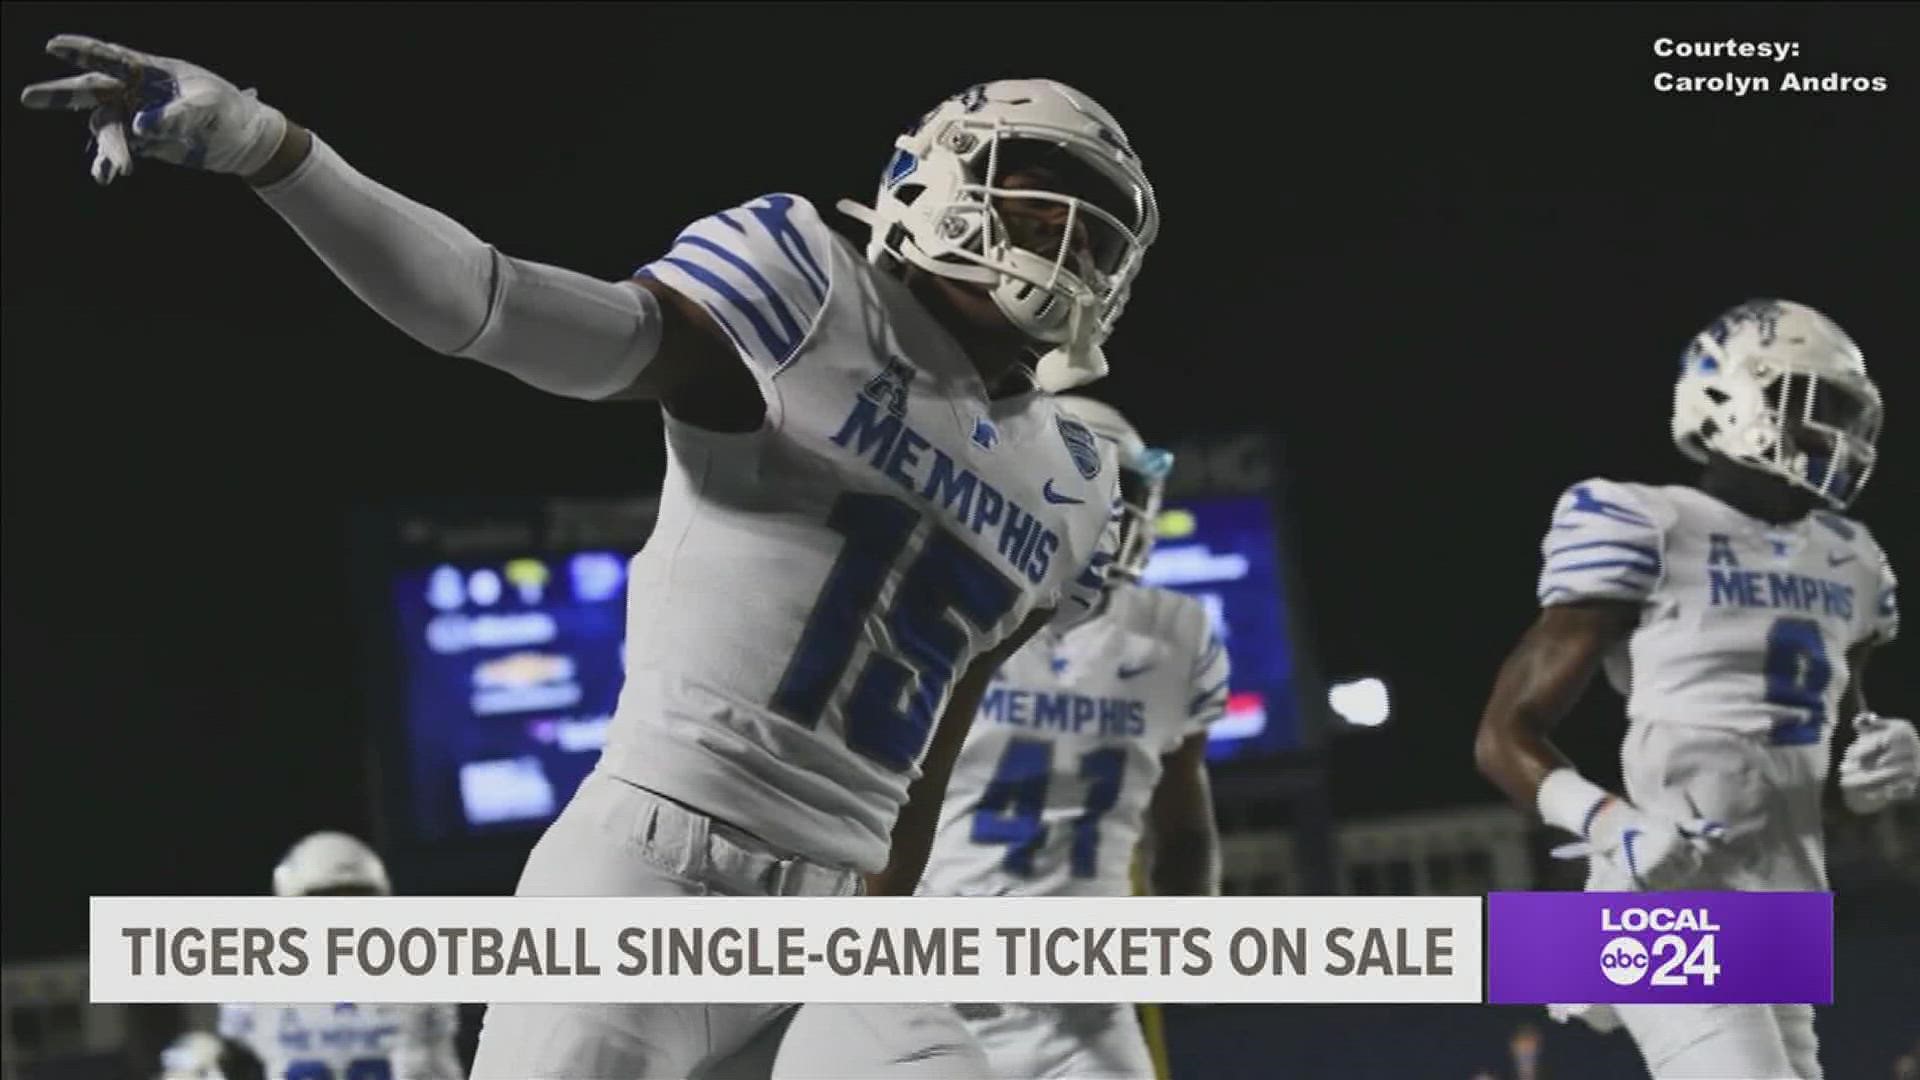 Single-game tickets as well as season tickets can be purchased online or by calling (901) 678-2331.